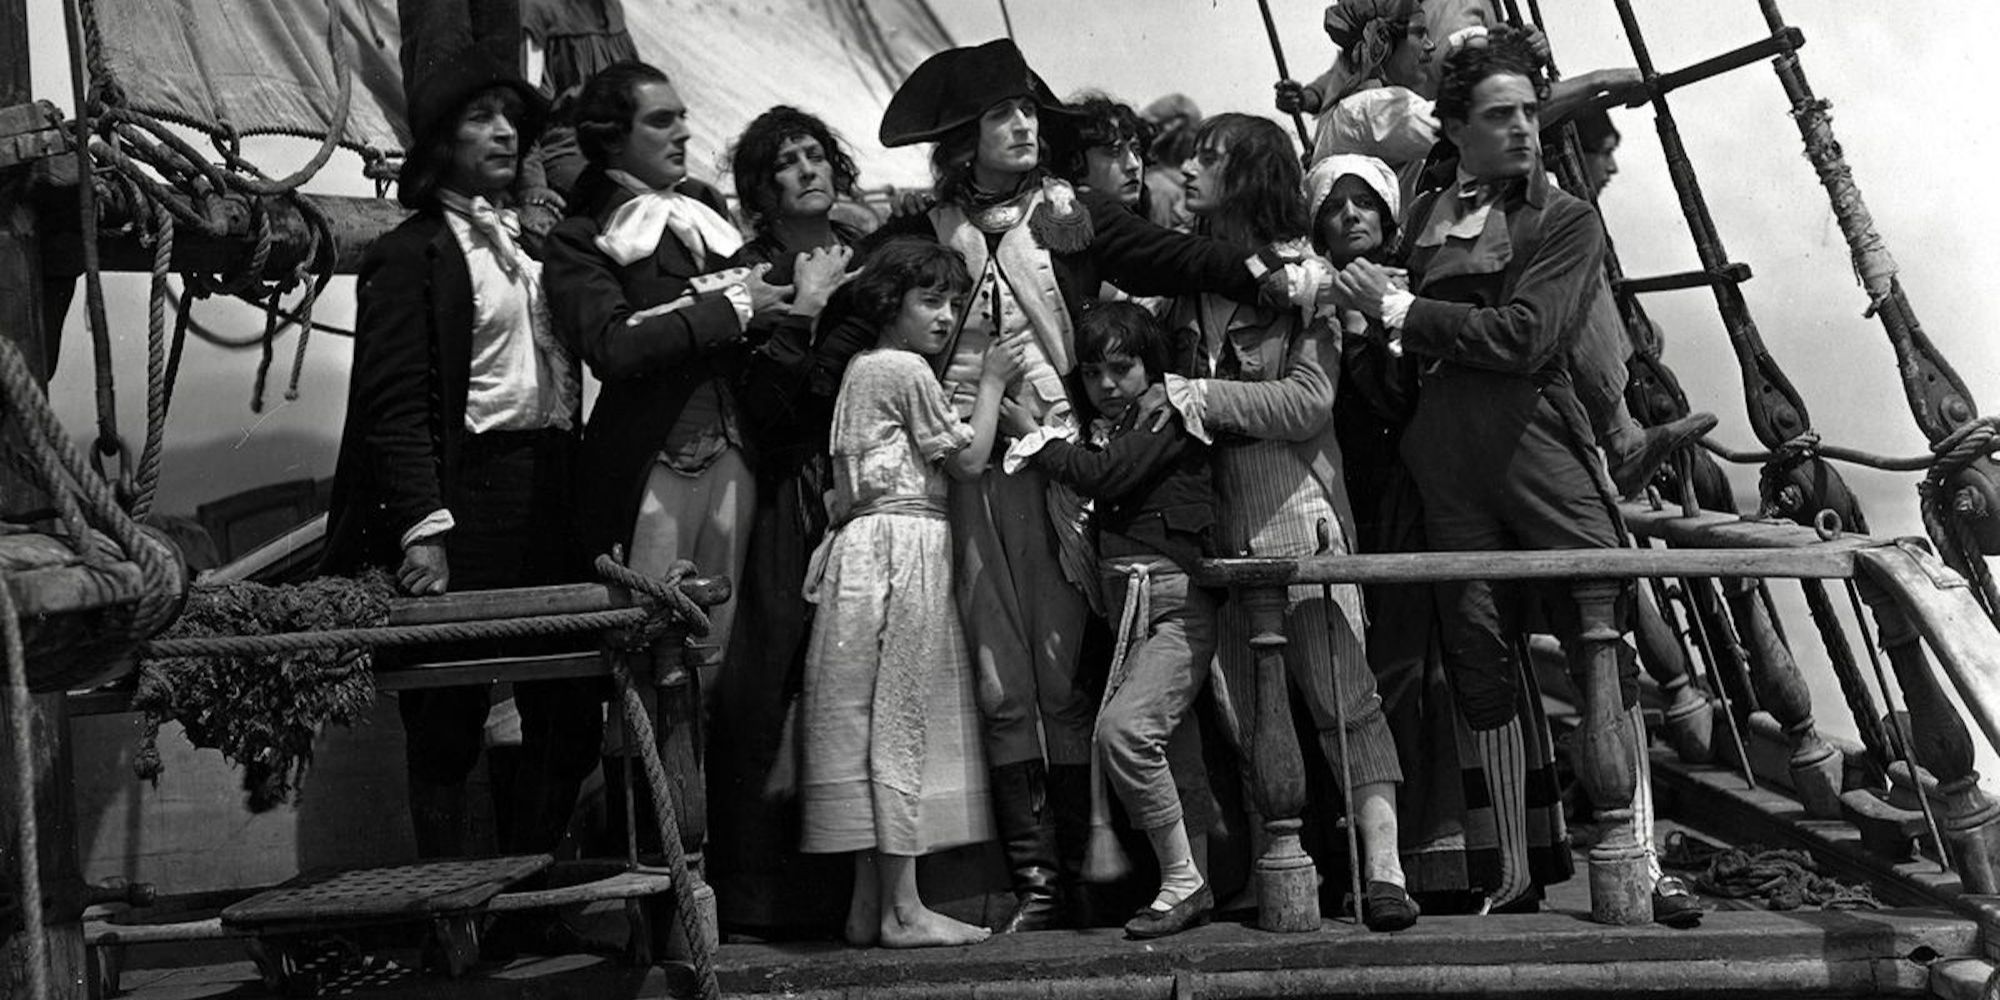 Napoleon, surrounded by the crew of his ship, in Abel Gance's 